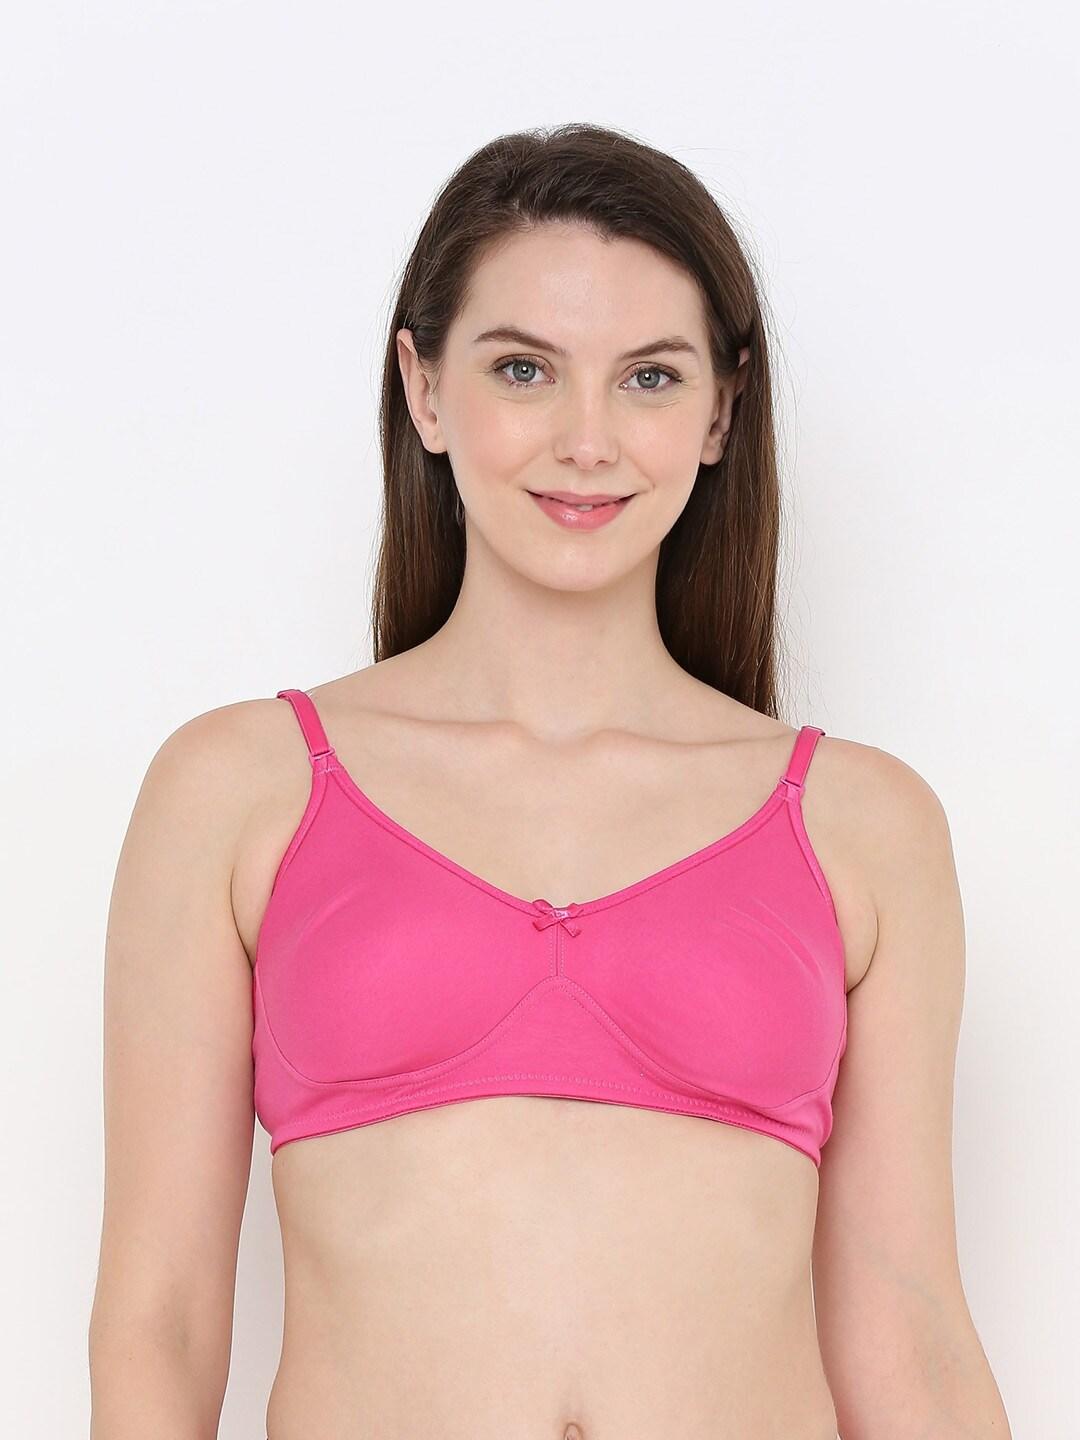 Berrys Intimatess Non Wired Non Padded No -Sag Bra